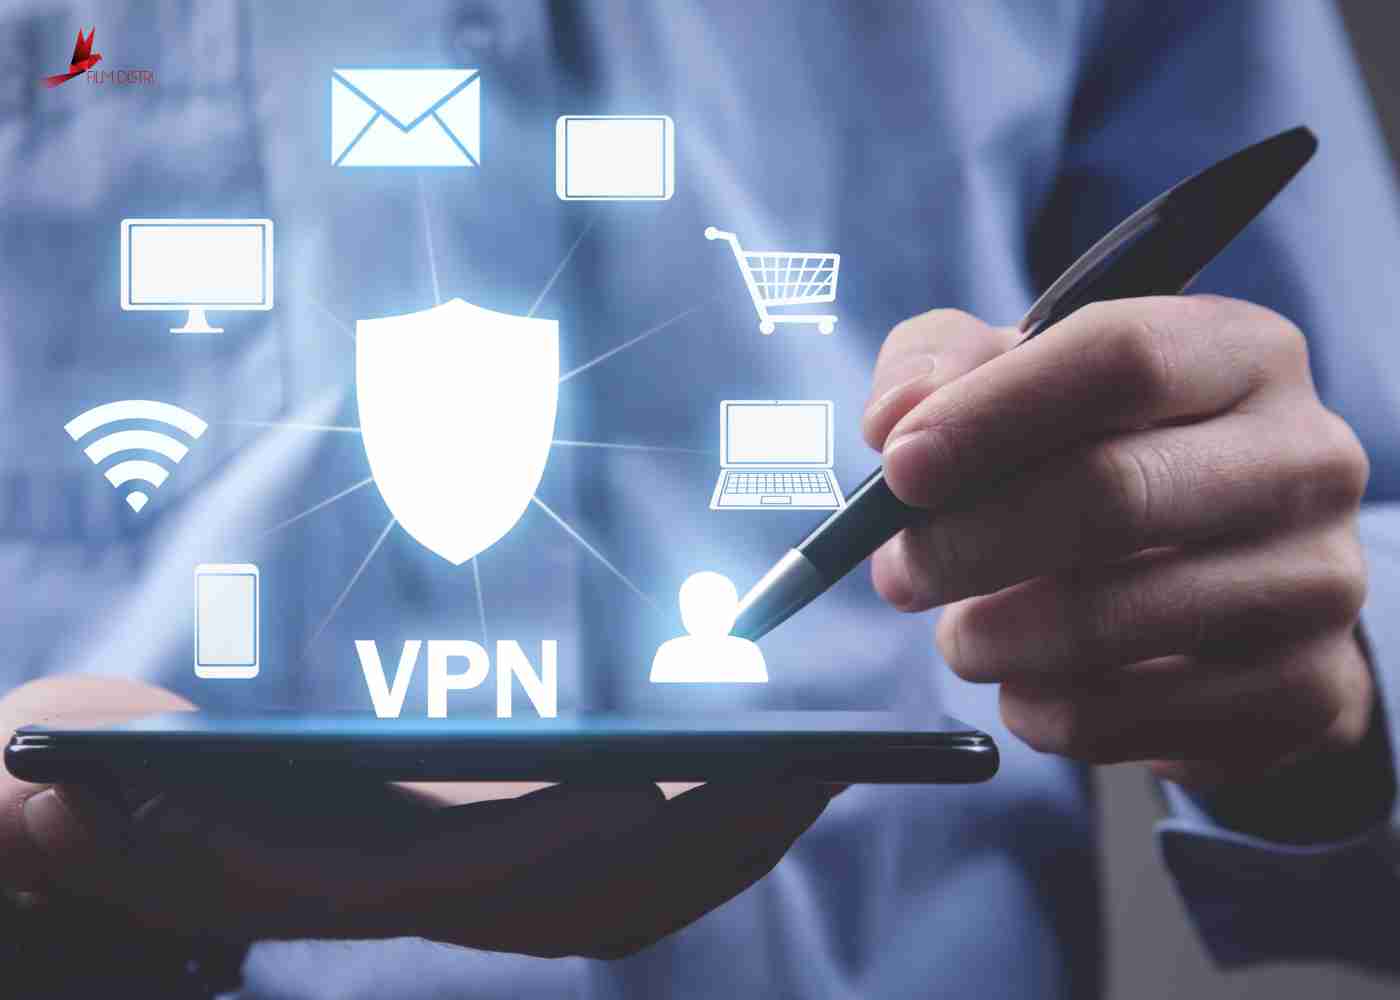 What is a VPN used for?